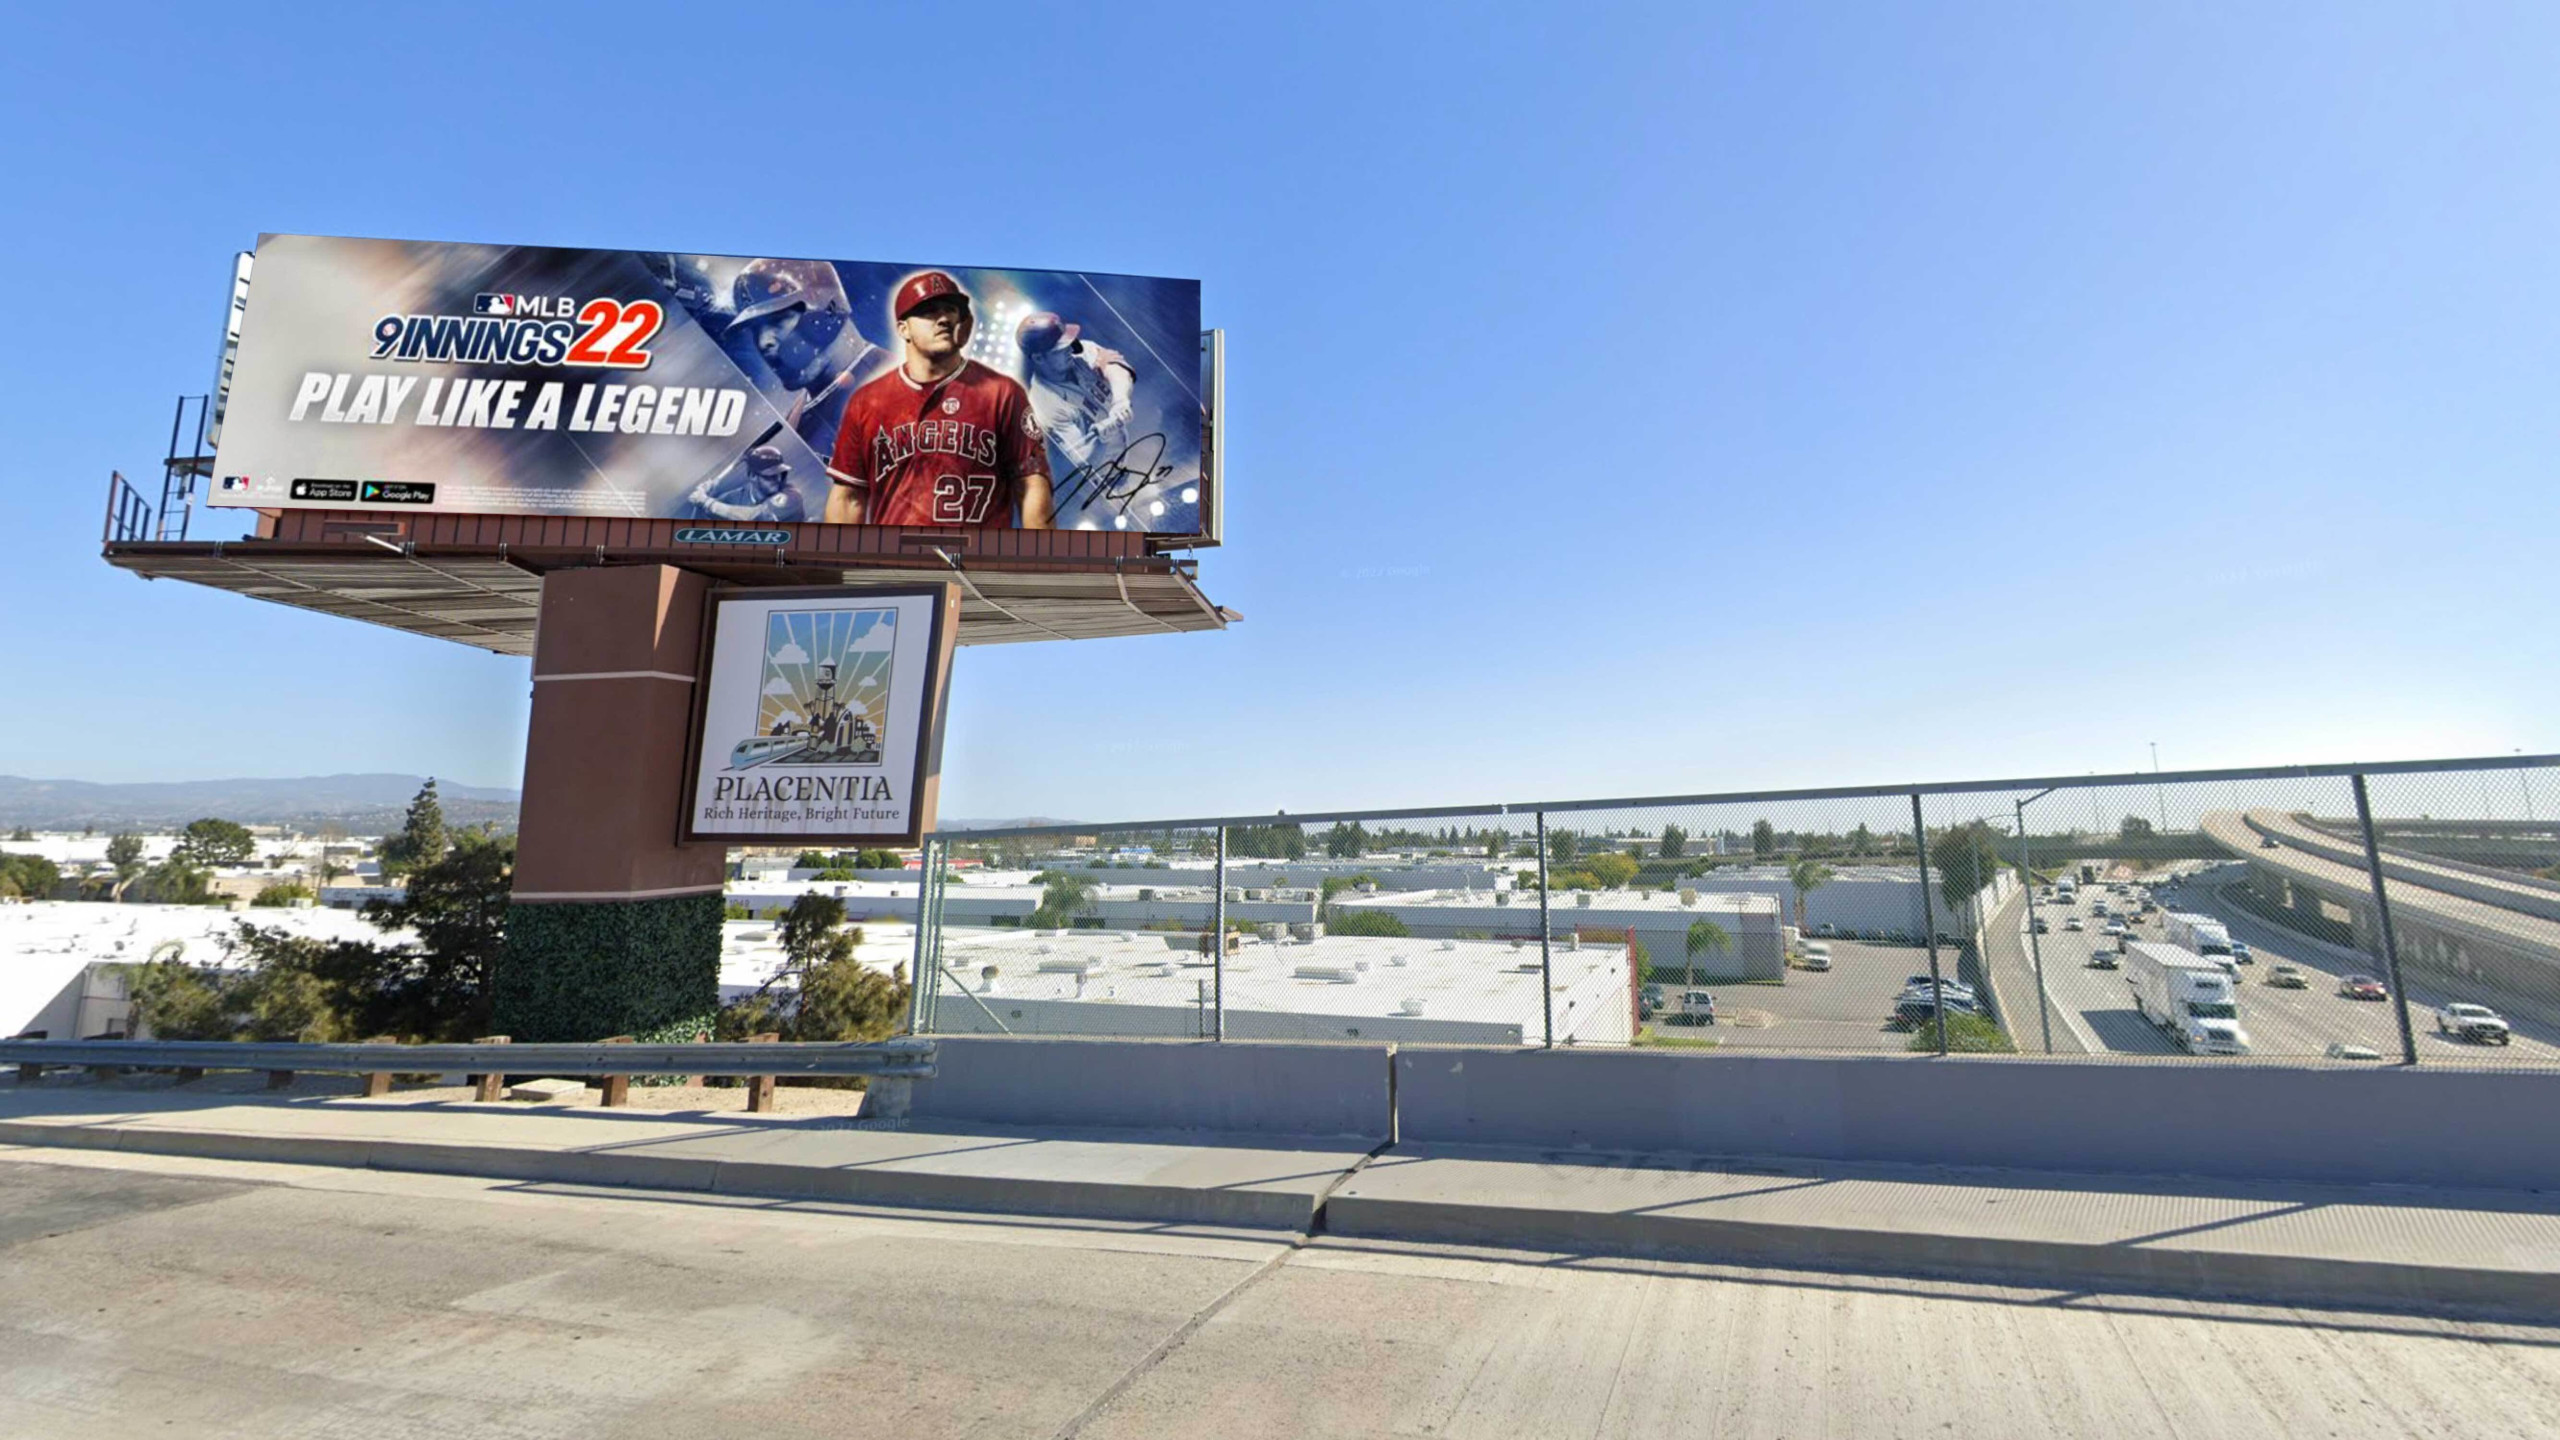 Connecting beyond borders: How Com2uS became North Asia’s first “inside-out” programmatic DOOH campaign in the USA